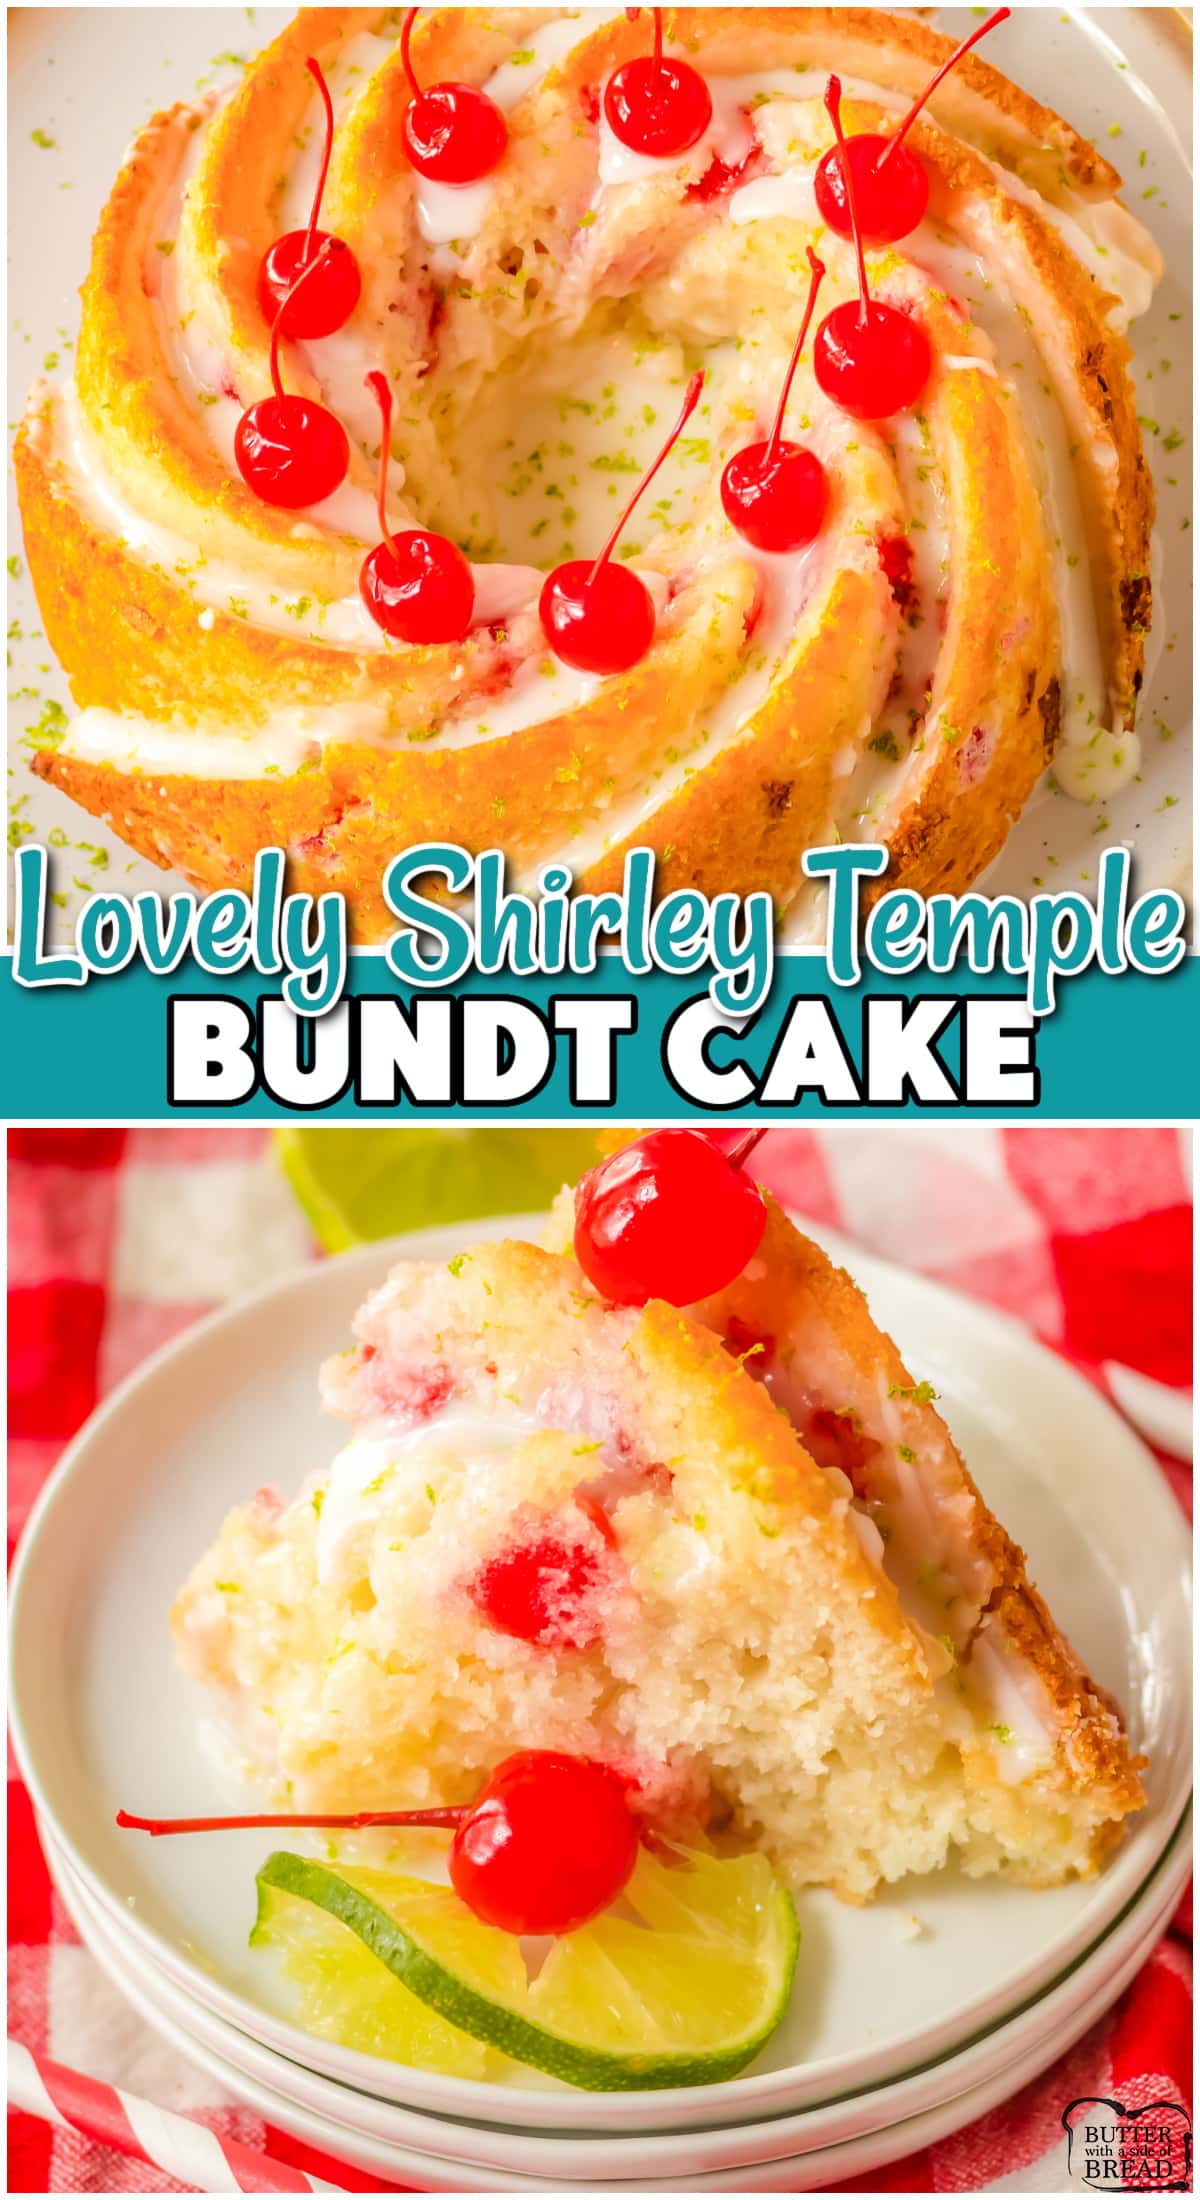 Shirley Temple Bundt Cake starts with a cake mix, then adds 7-Up, cherries & more lemon lime flavor! Light, perfectly sweet lemon lime cake studded with cherries! 